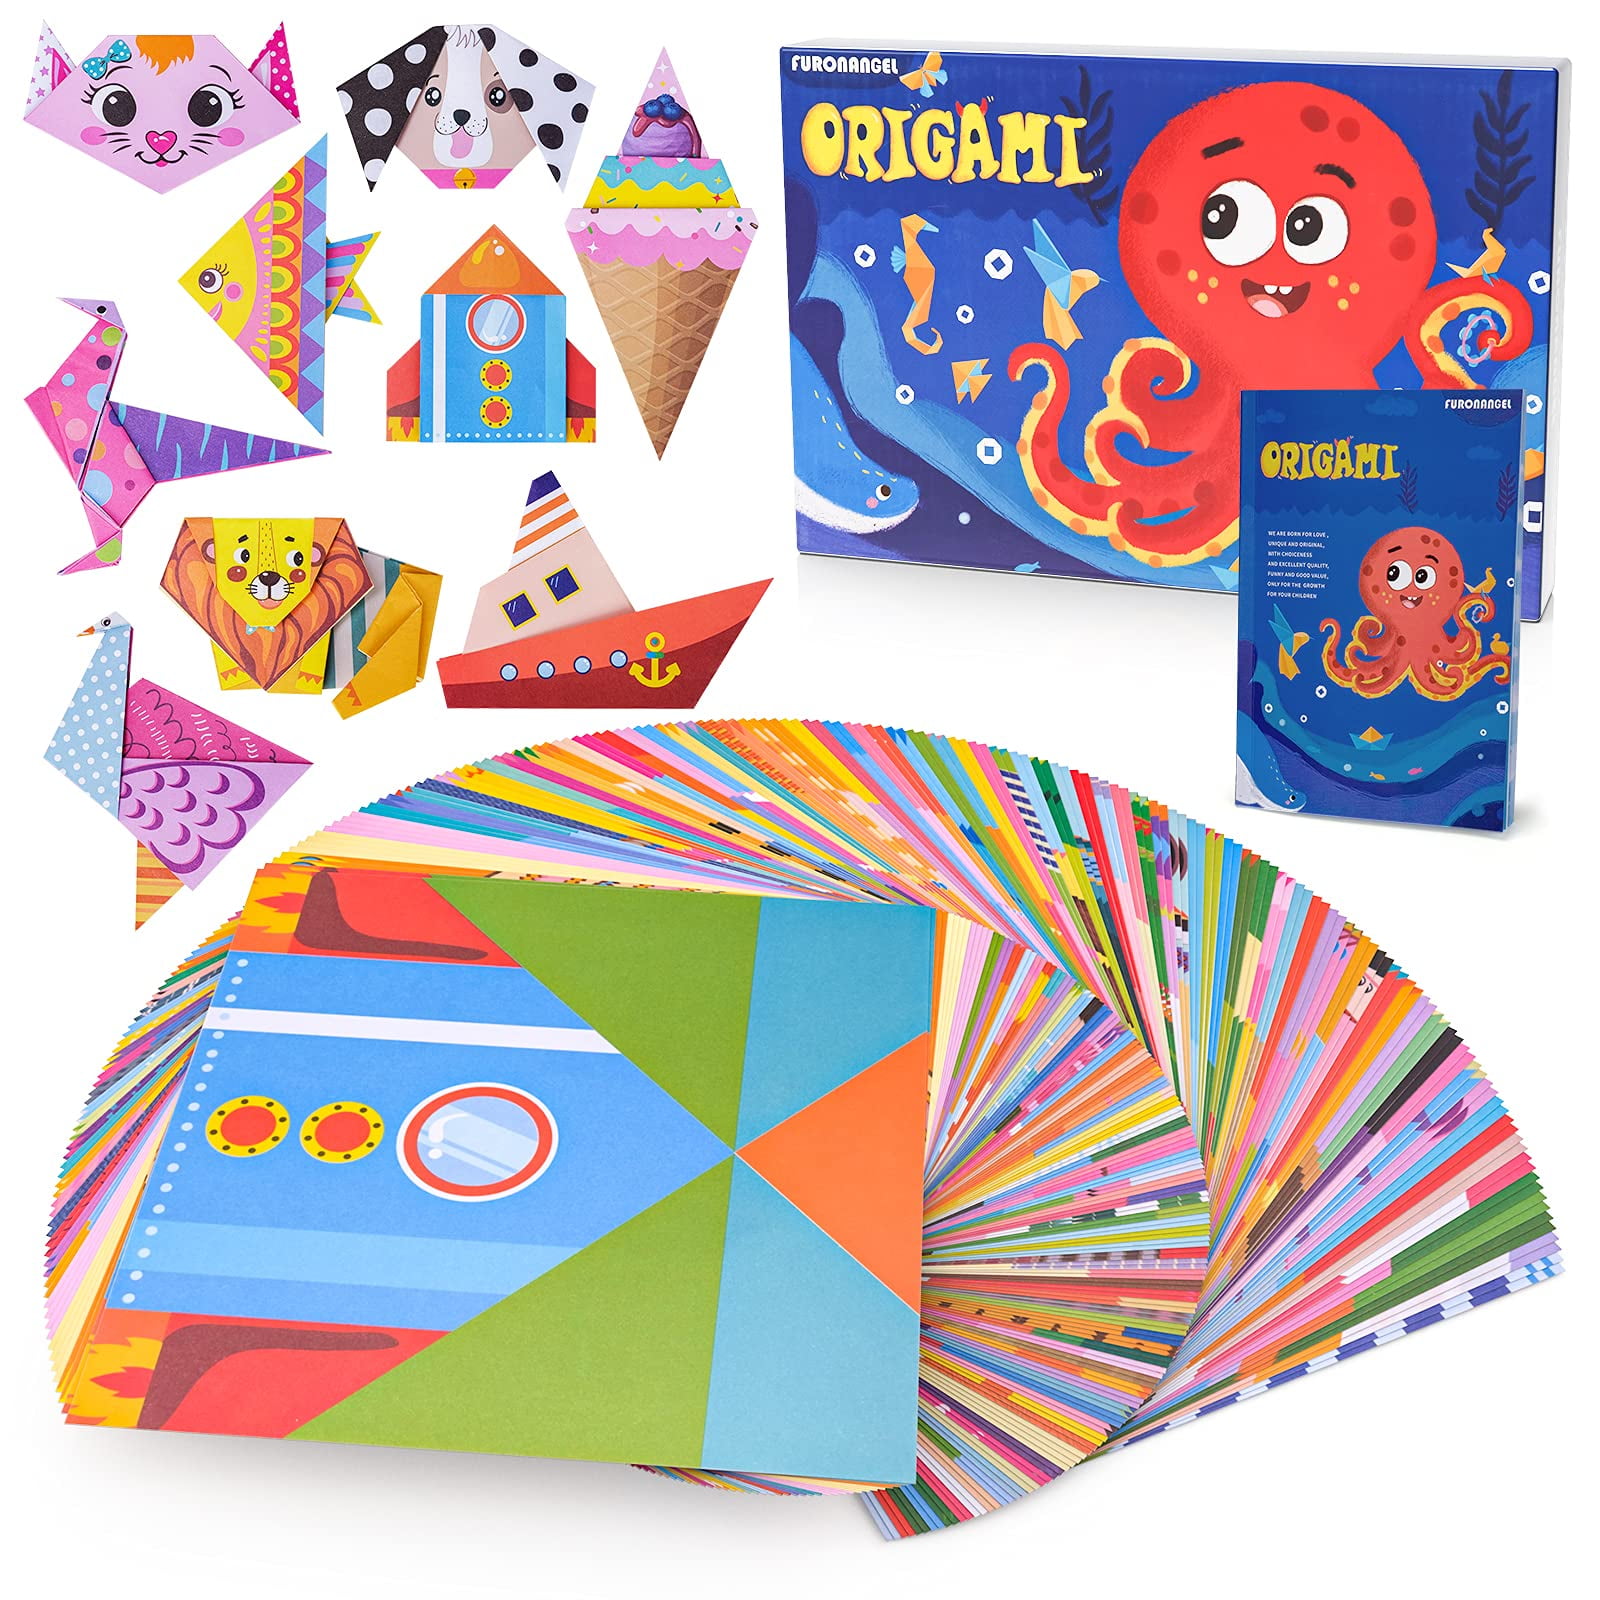 Aigybobo Origami Paper Set, 308PCS Kids Craft Paper Kit with Instructional  Book for Girls Age 6,7,8,9,10,11,12, Art Projects Supplies for School Class  Craft Lessons- Christmas Gifts for Boys&Girls